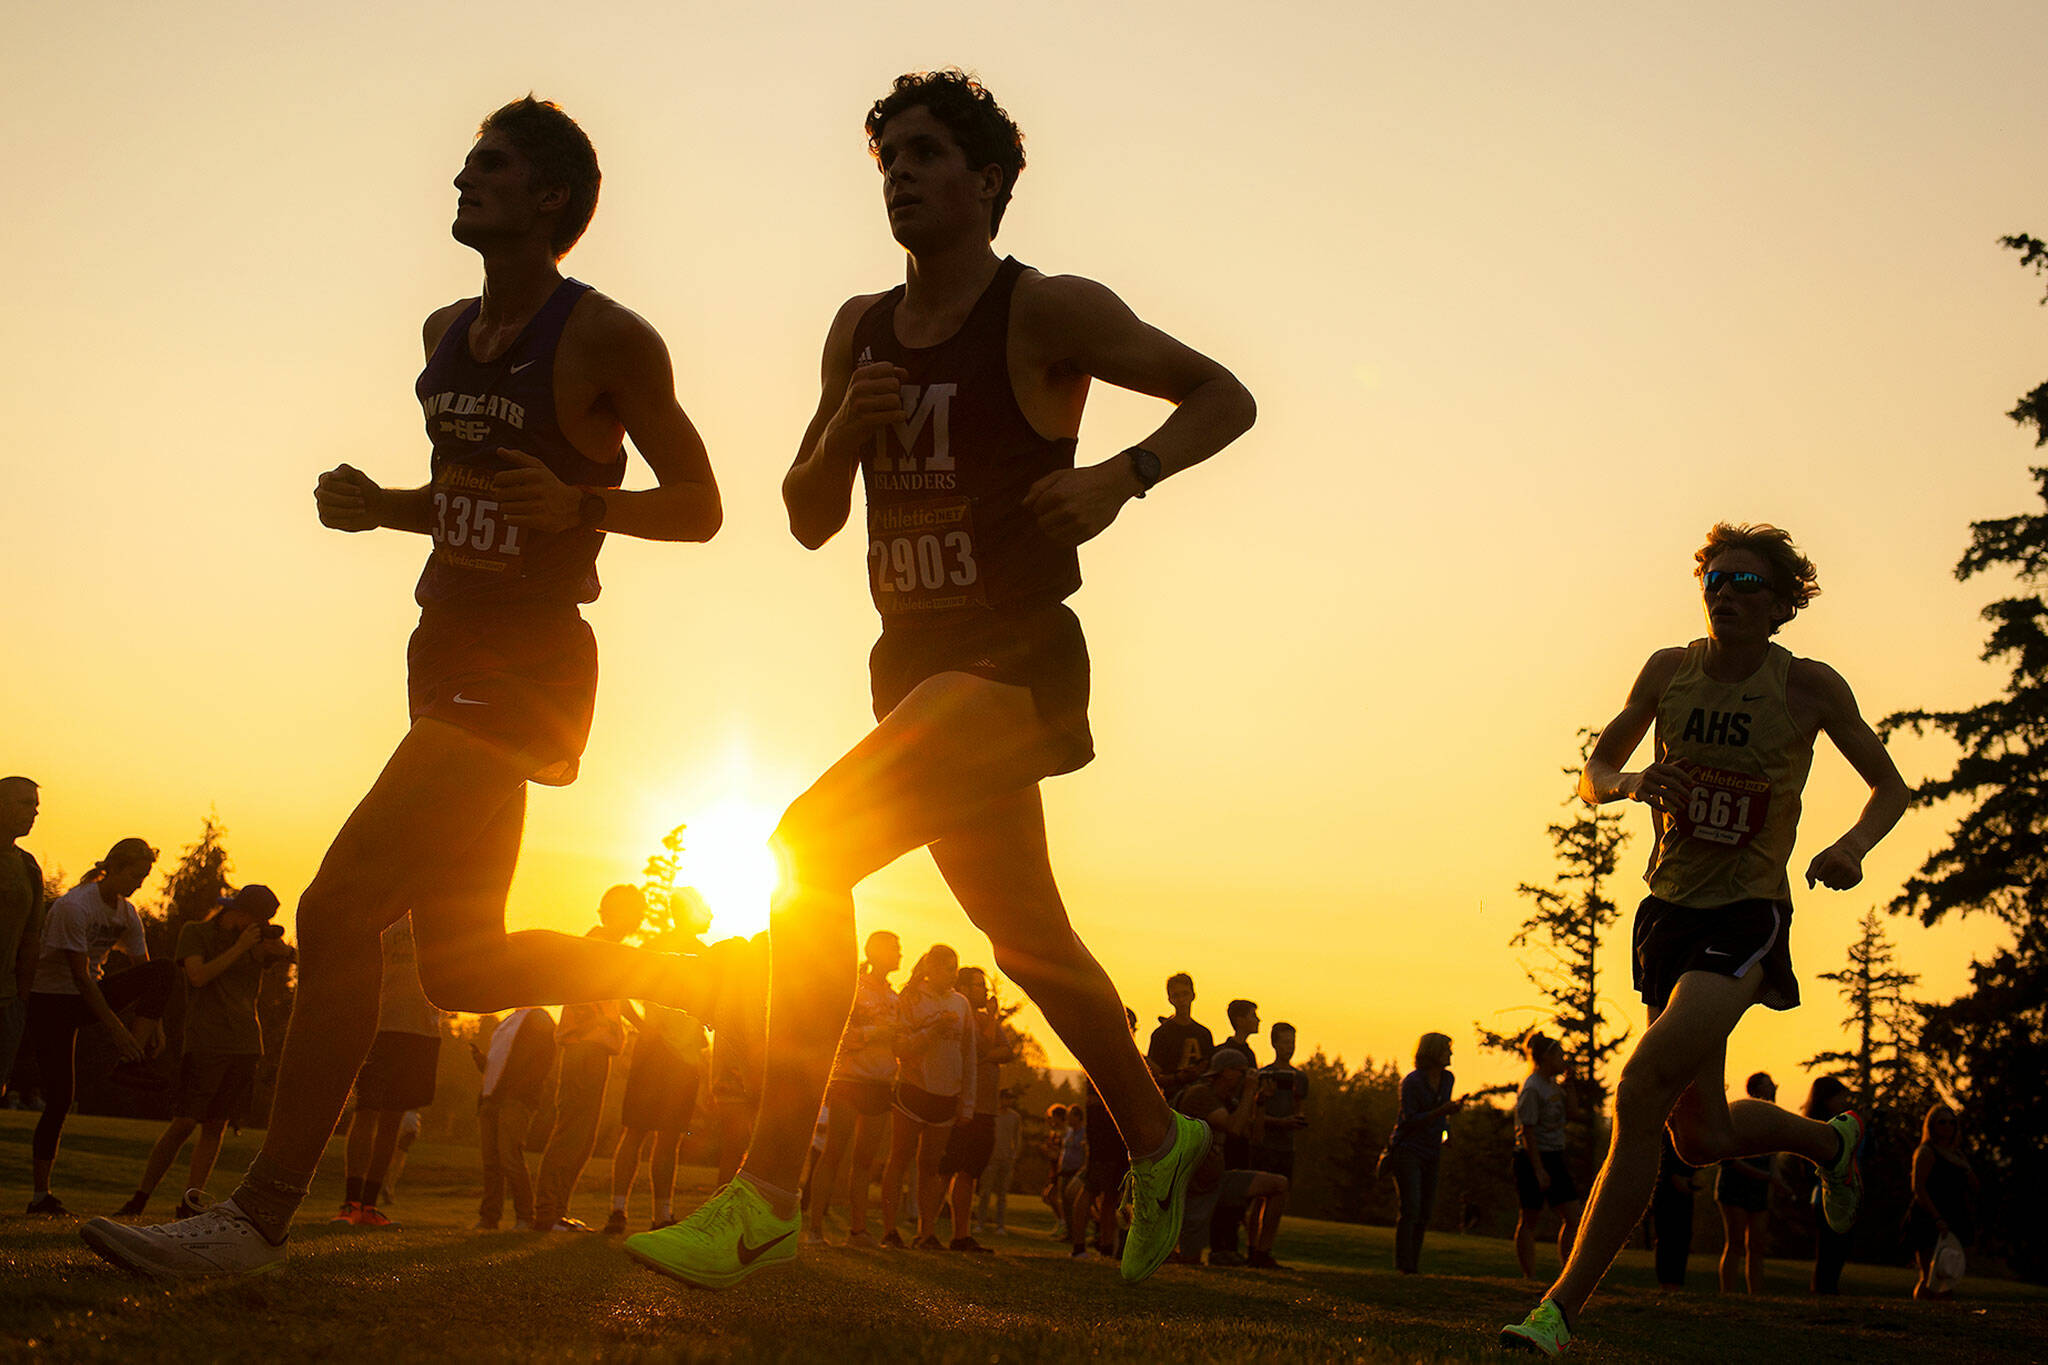 Runners in the 3A-4A Boys 5K turn a corner as the sun sets during the Nike Twilight Cross Country Invitational on Saturday, Oct. 1, 2022, at Cedarcrest Golf Course in Marysville, Washington. (Ryan Berry / The Herald)